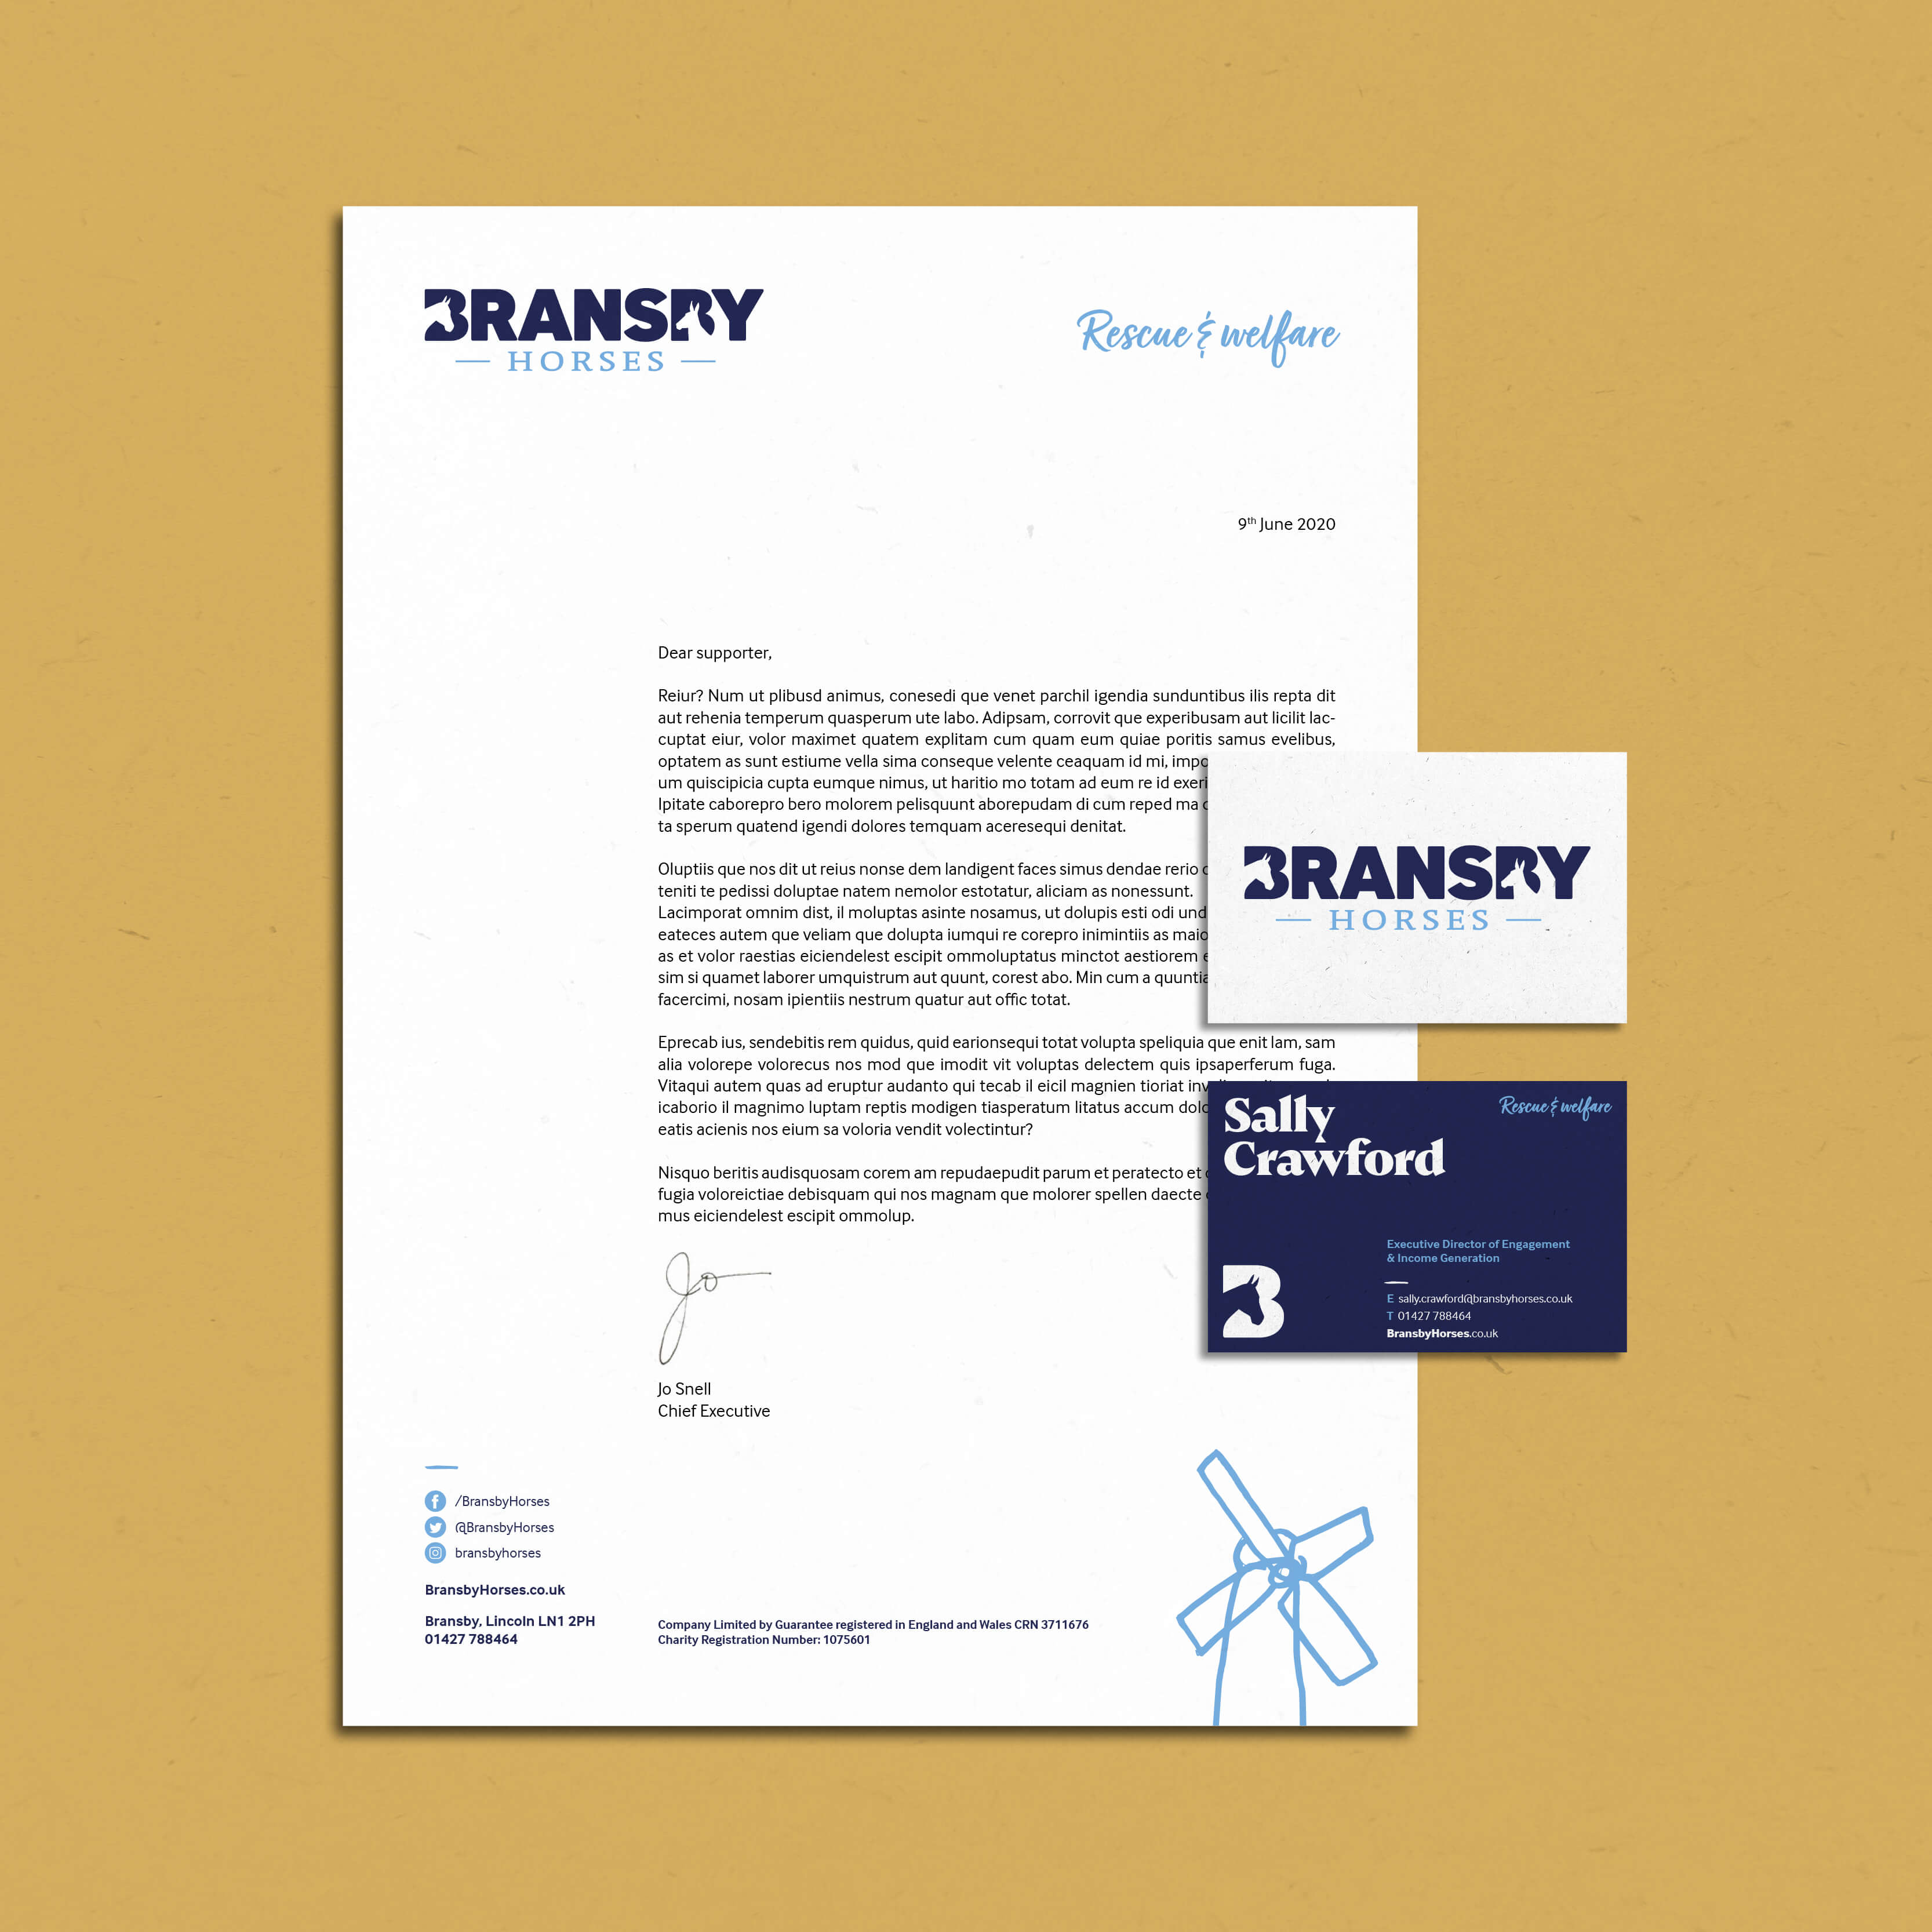 Bransby Horses case study